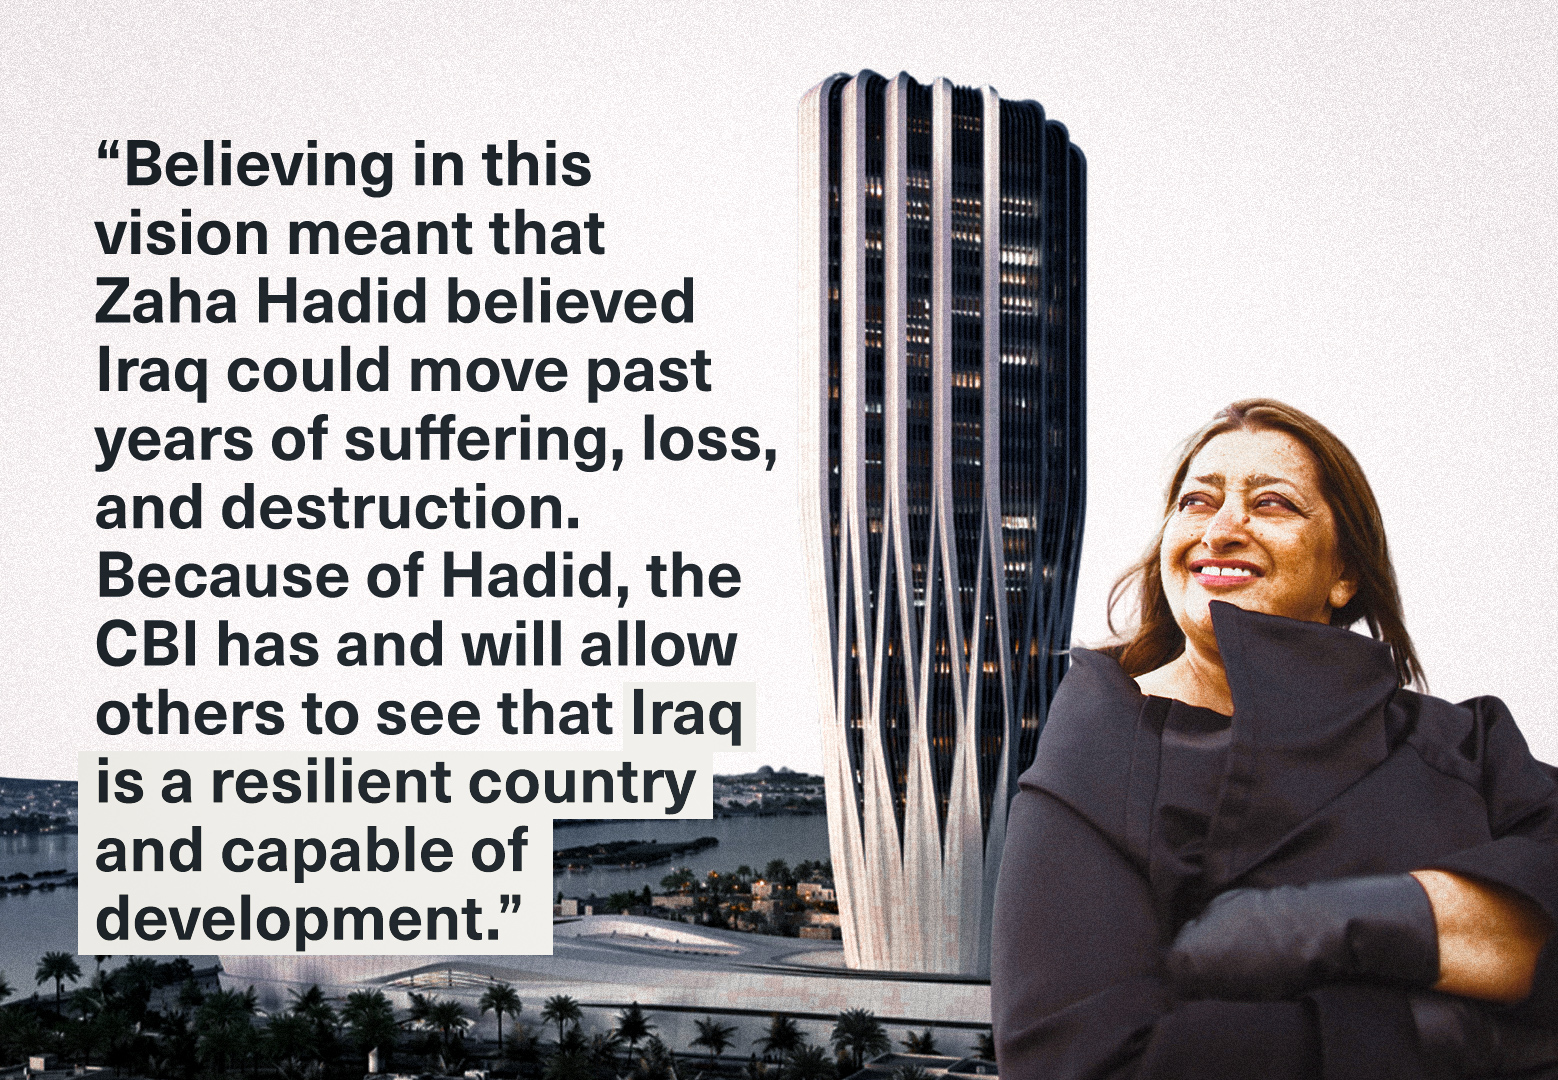 Zaha Hadid: The 'Queen of the Curve' and Iraq's central bank